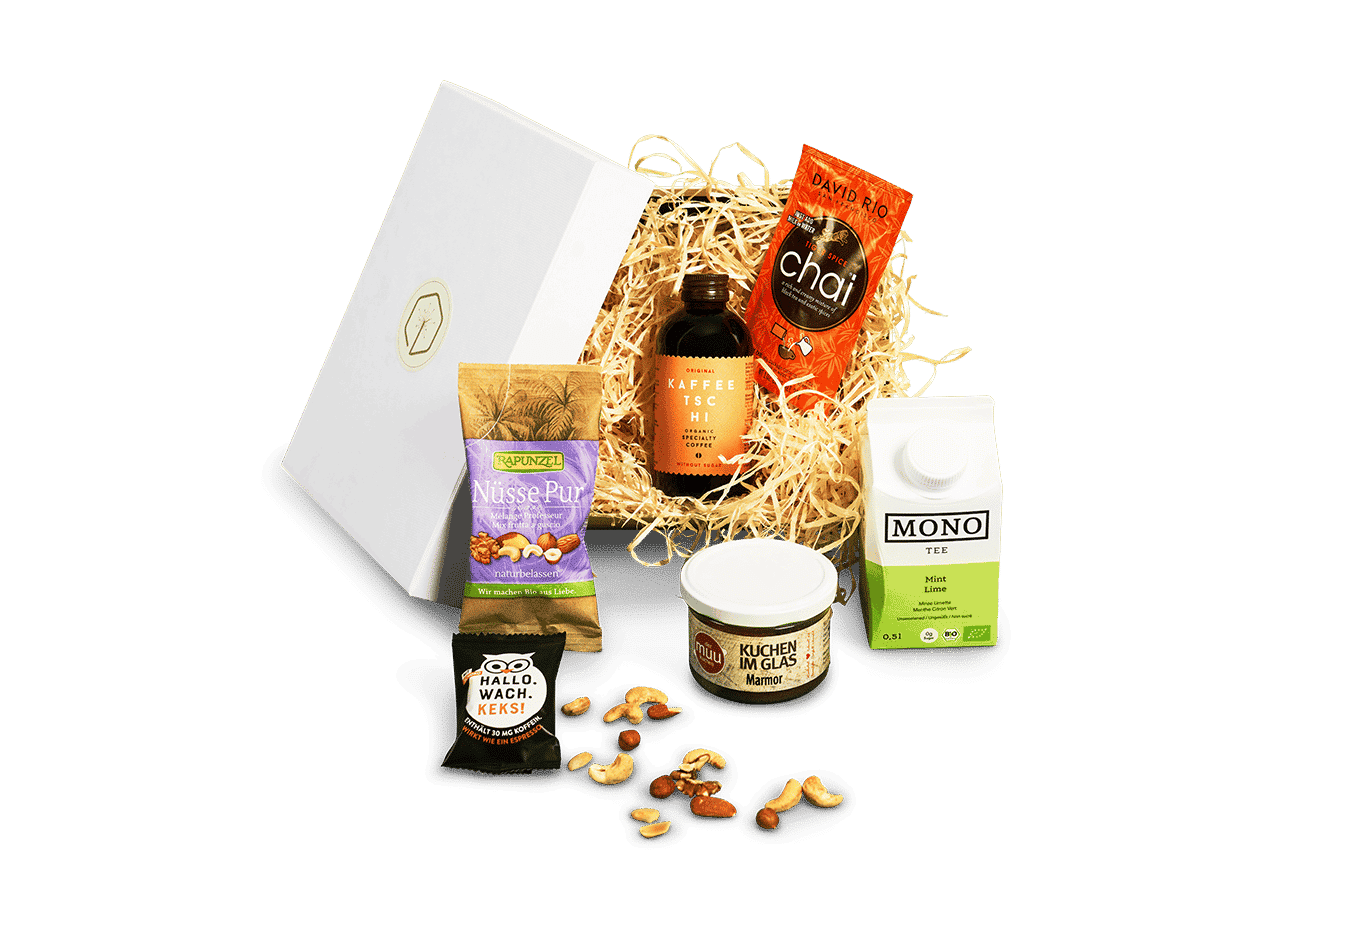 The coffee box contains everything you need for a cosy coffee break: crunchy natural nuts, an activating Hallo.Wach.Keks!, a spicy chai blend and refreshing mint-lime tea. and of course a juicy marble cake and an invigorating cold-brew coffee.